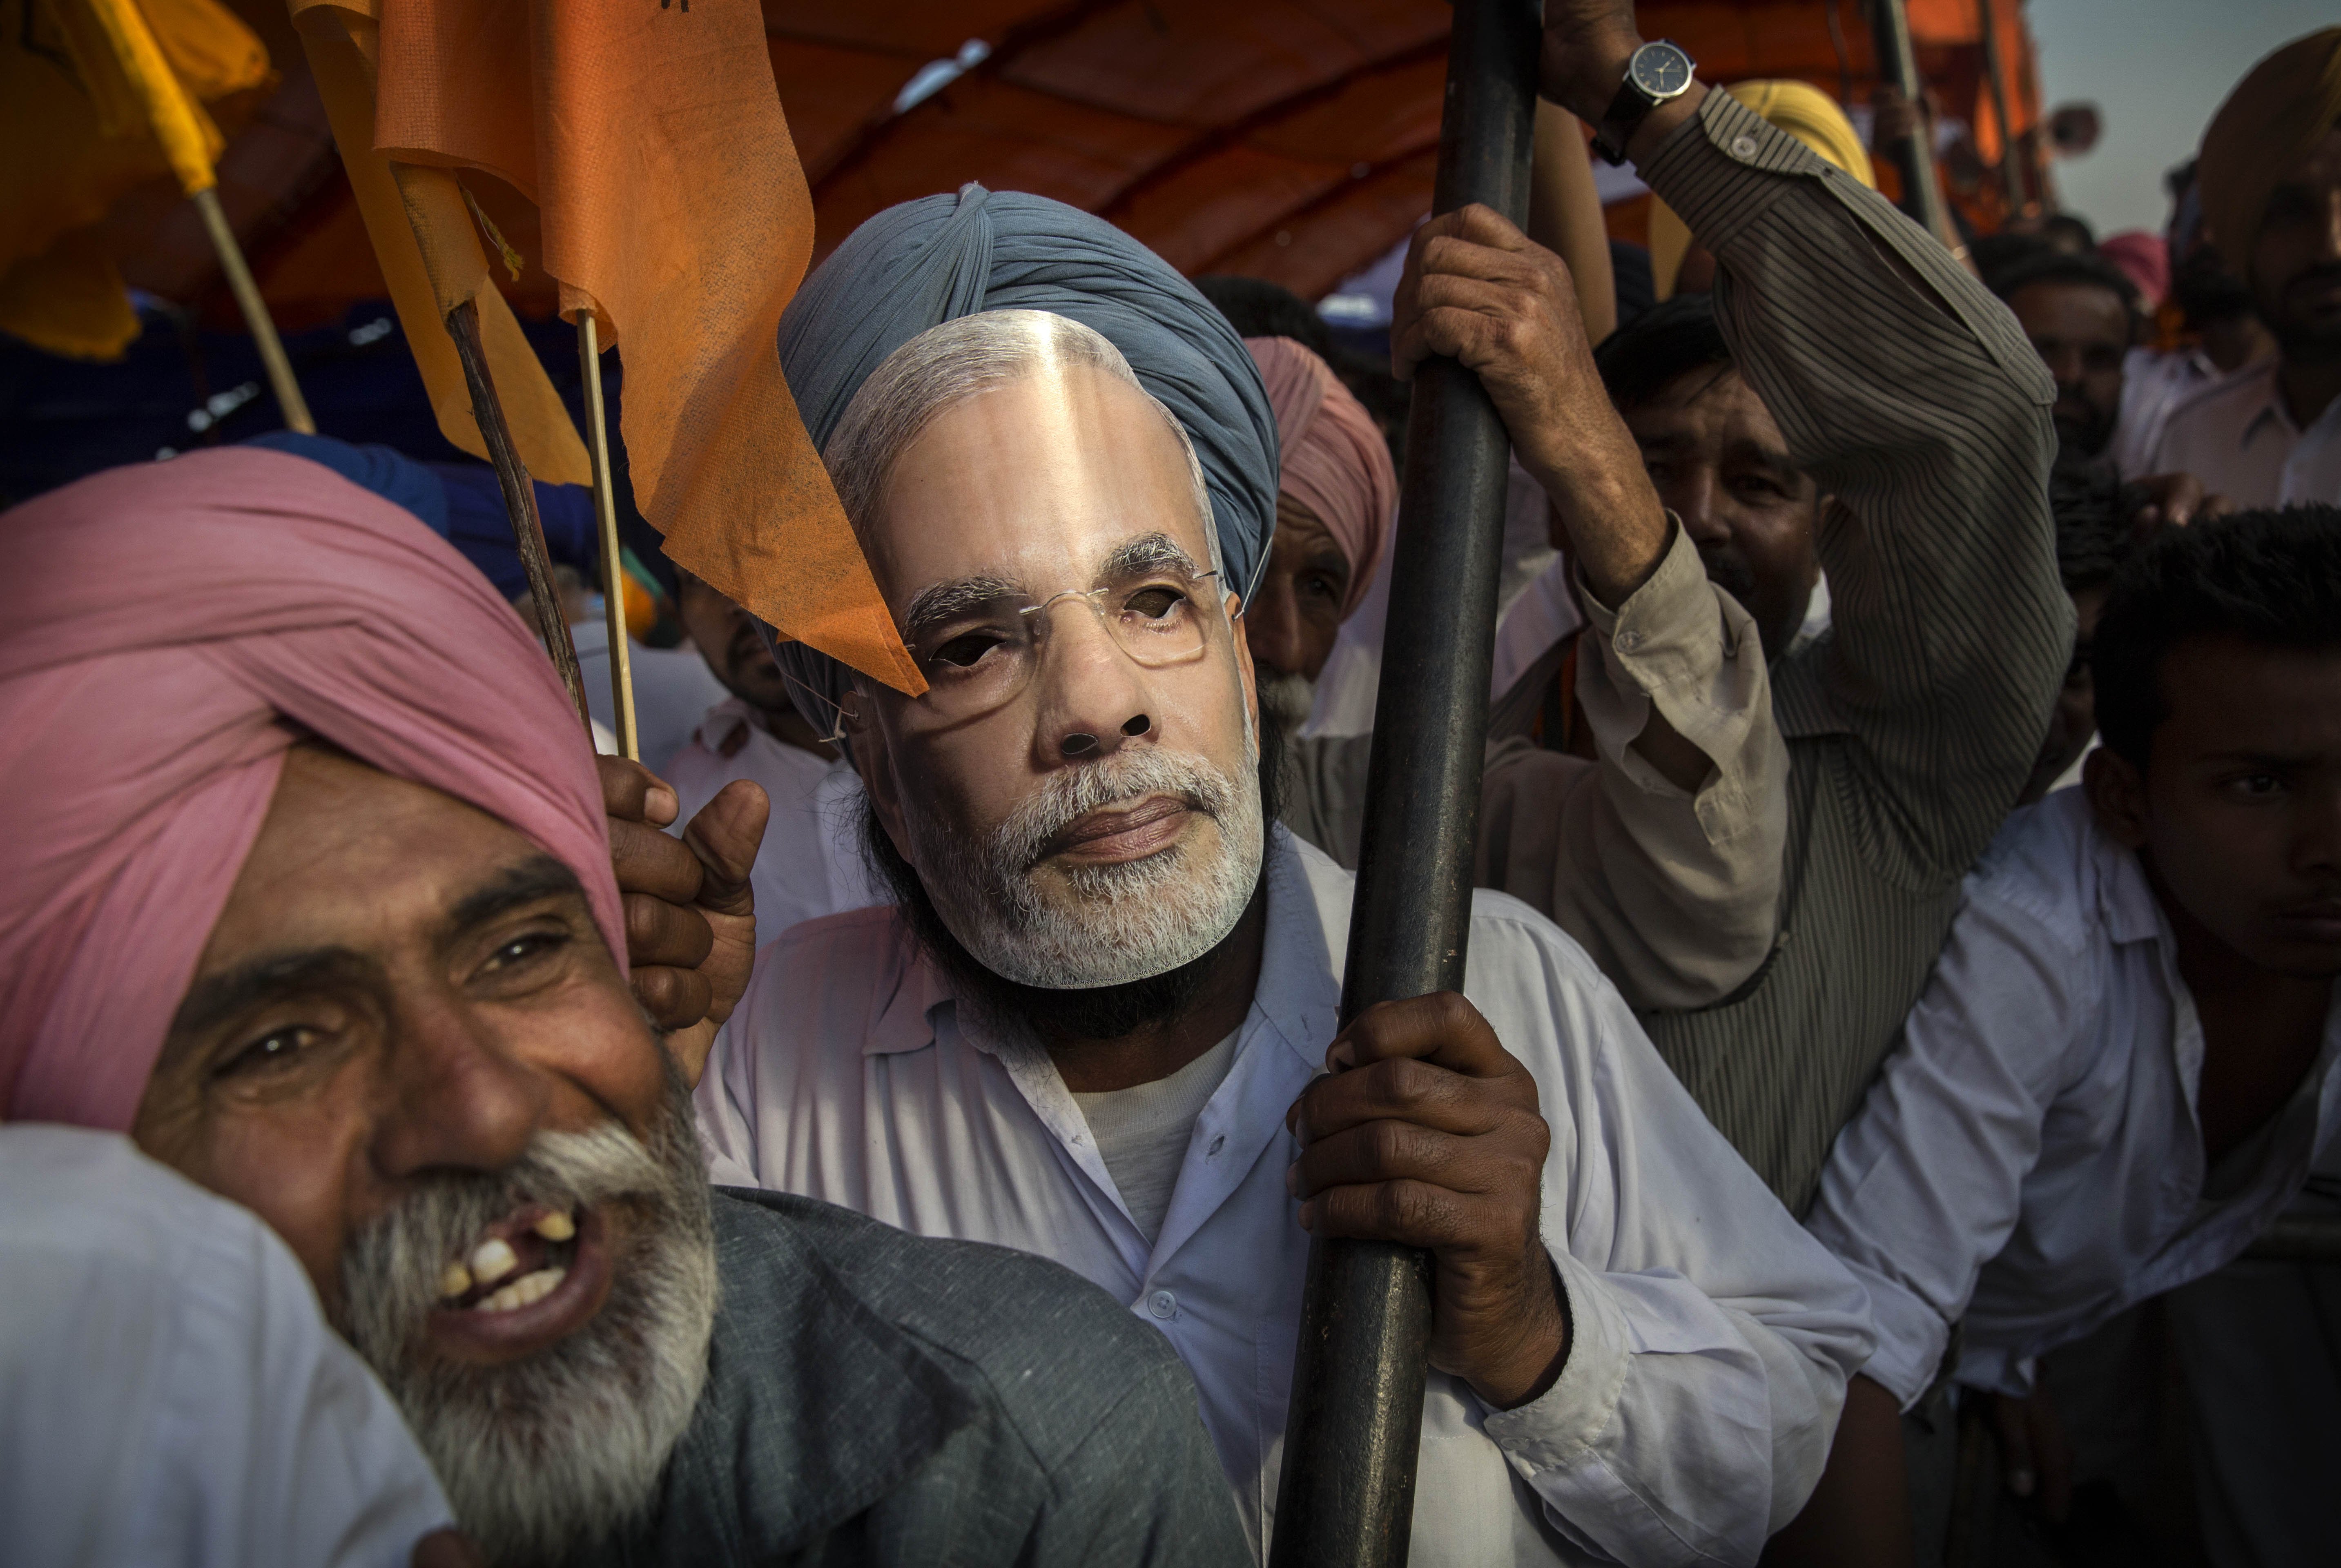 Sikh man wears a mask of BJP leader Narendra Modi as people crowd to hear his speech on April 25, 2014 in Bathinder, Punjab.